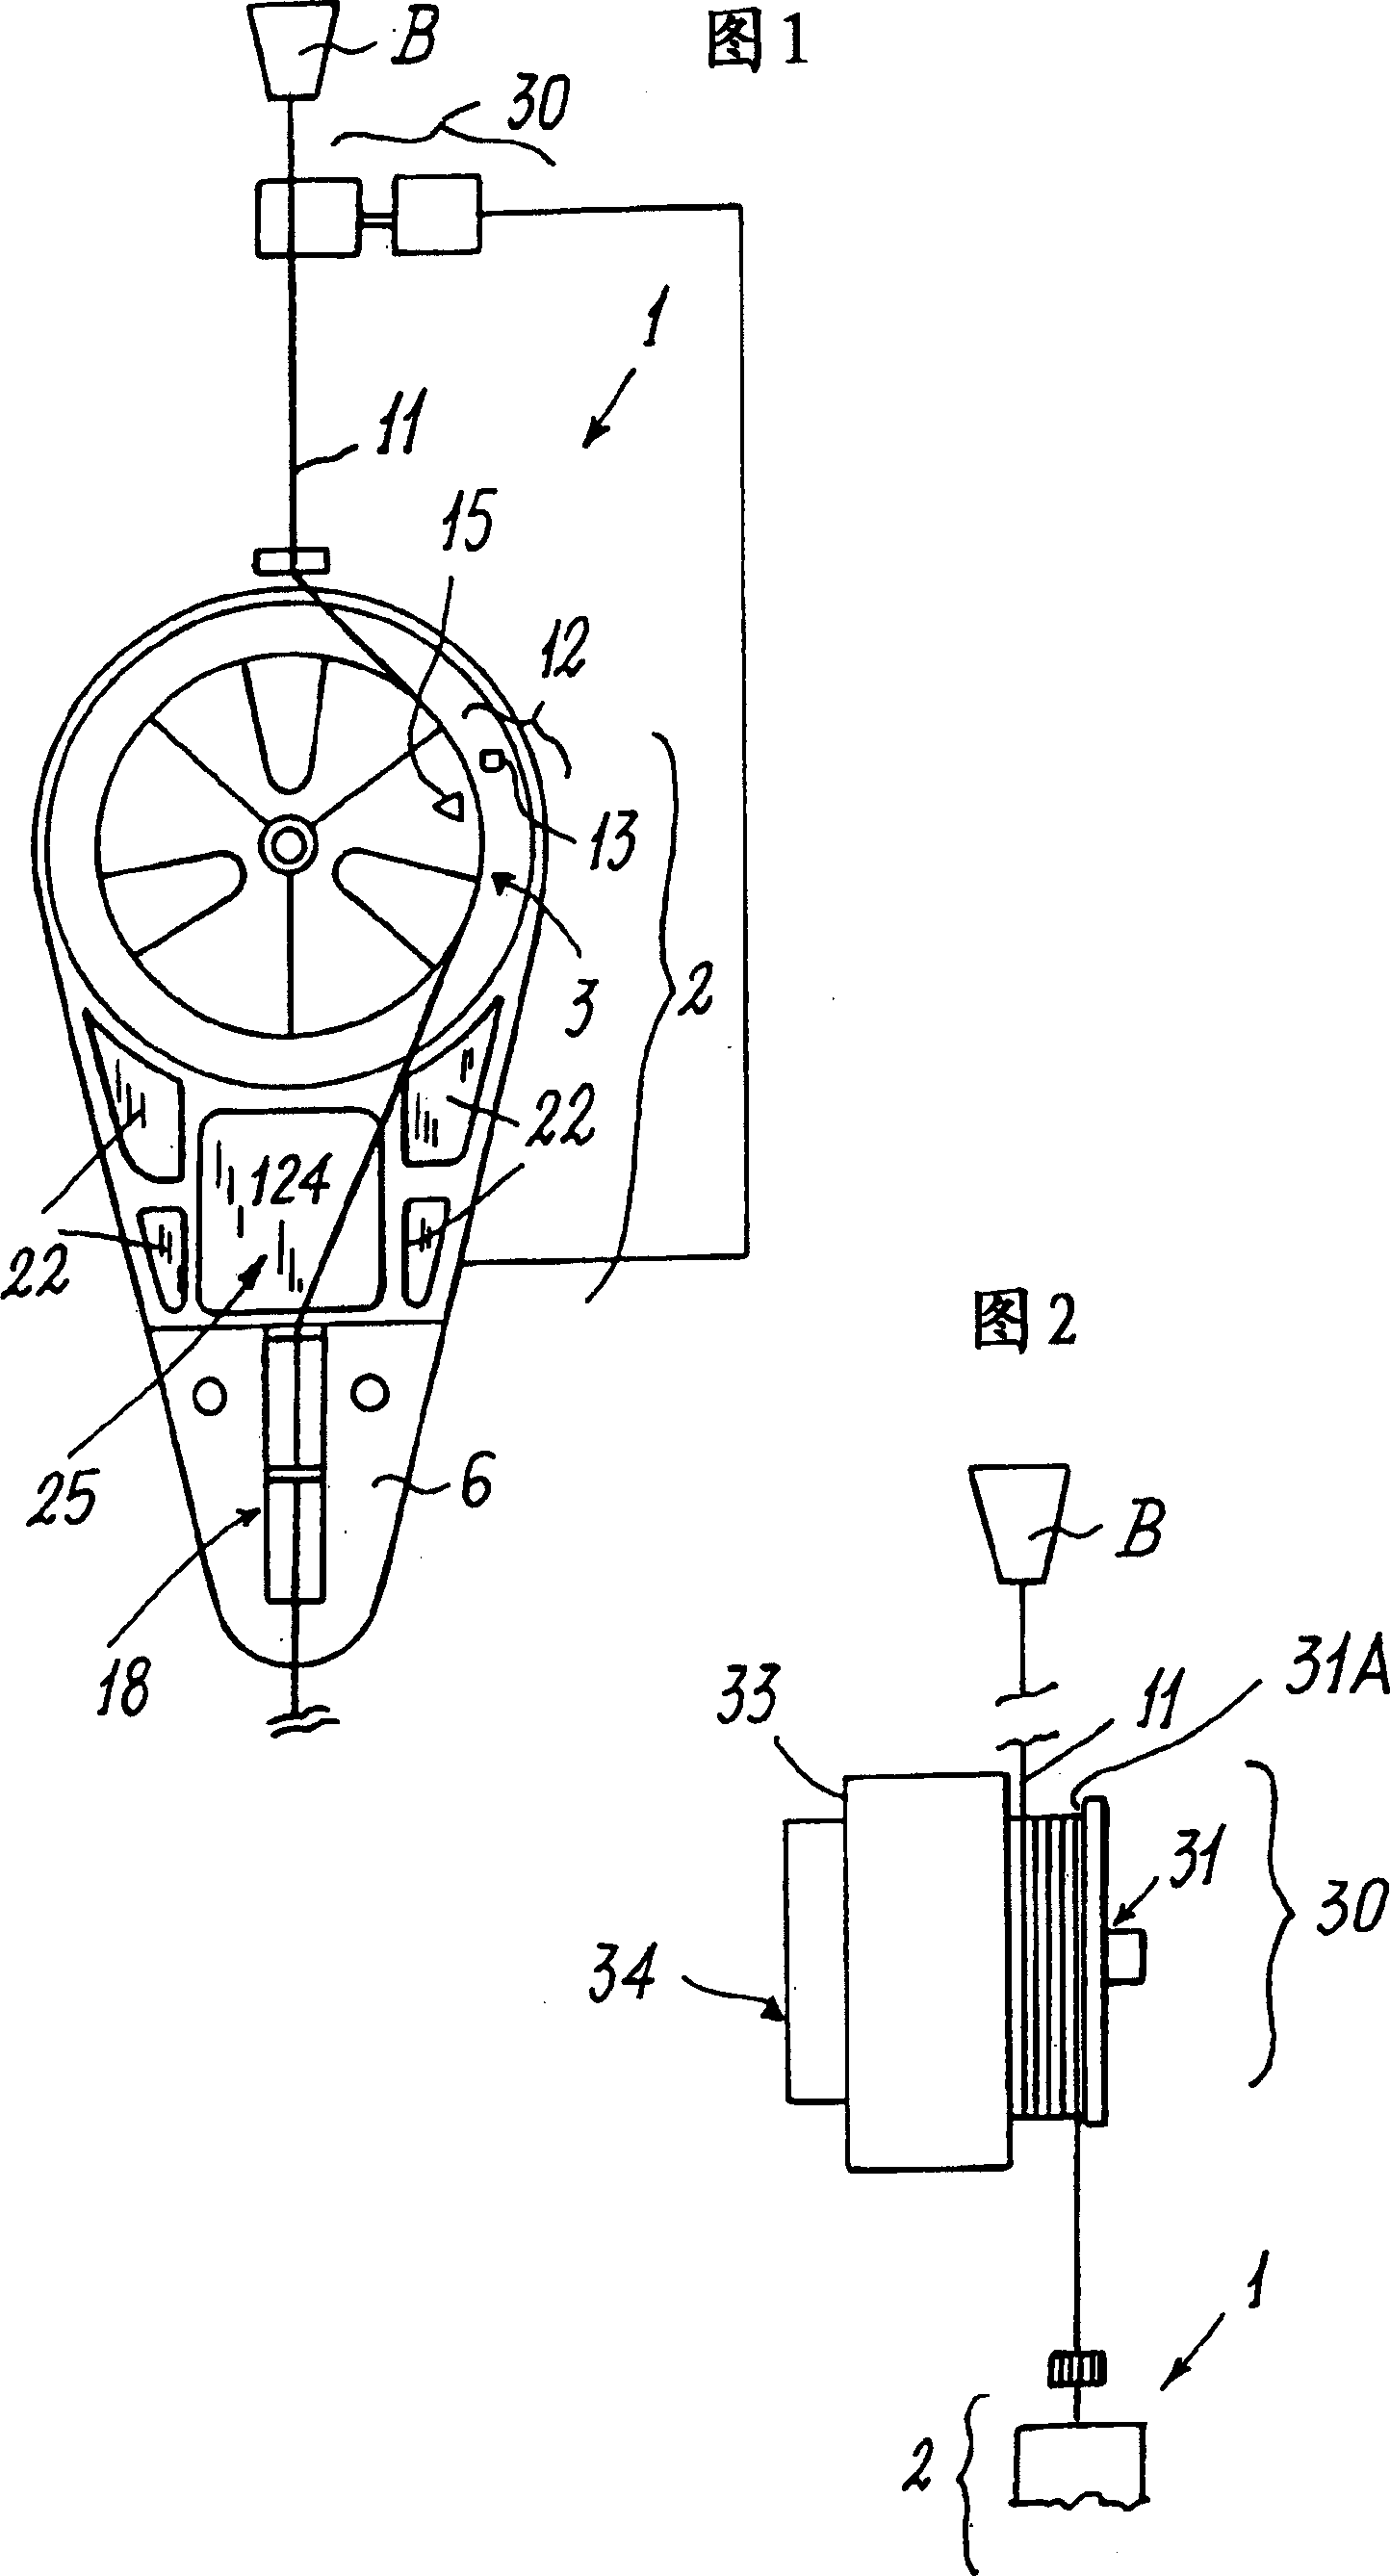 Device and method for feeding an elastomeric yarn to a textile machine